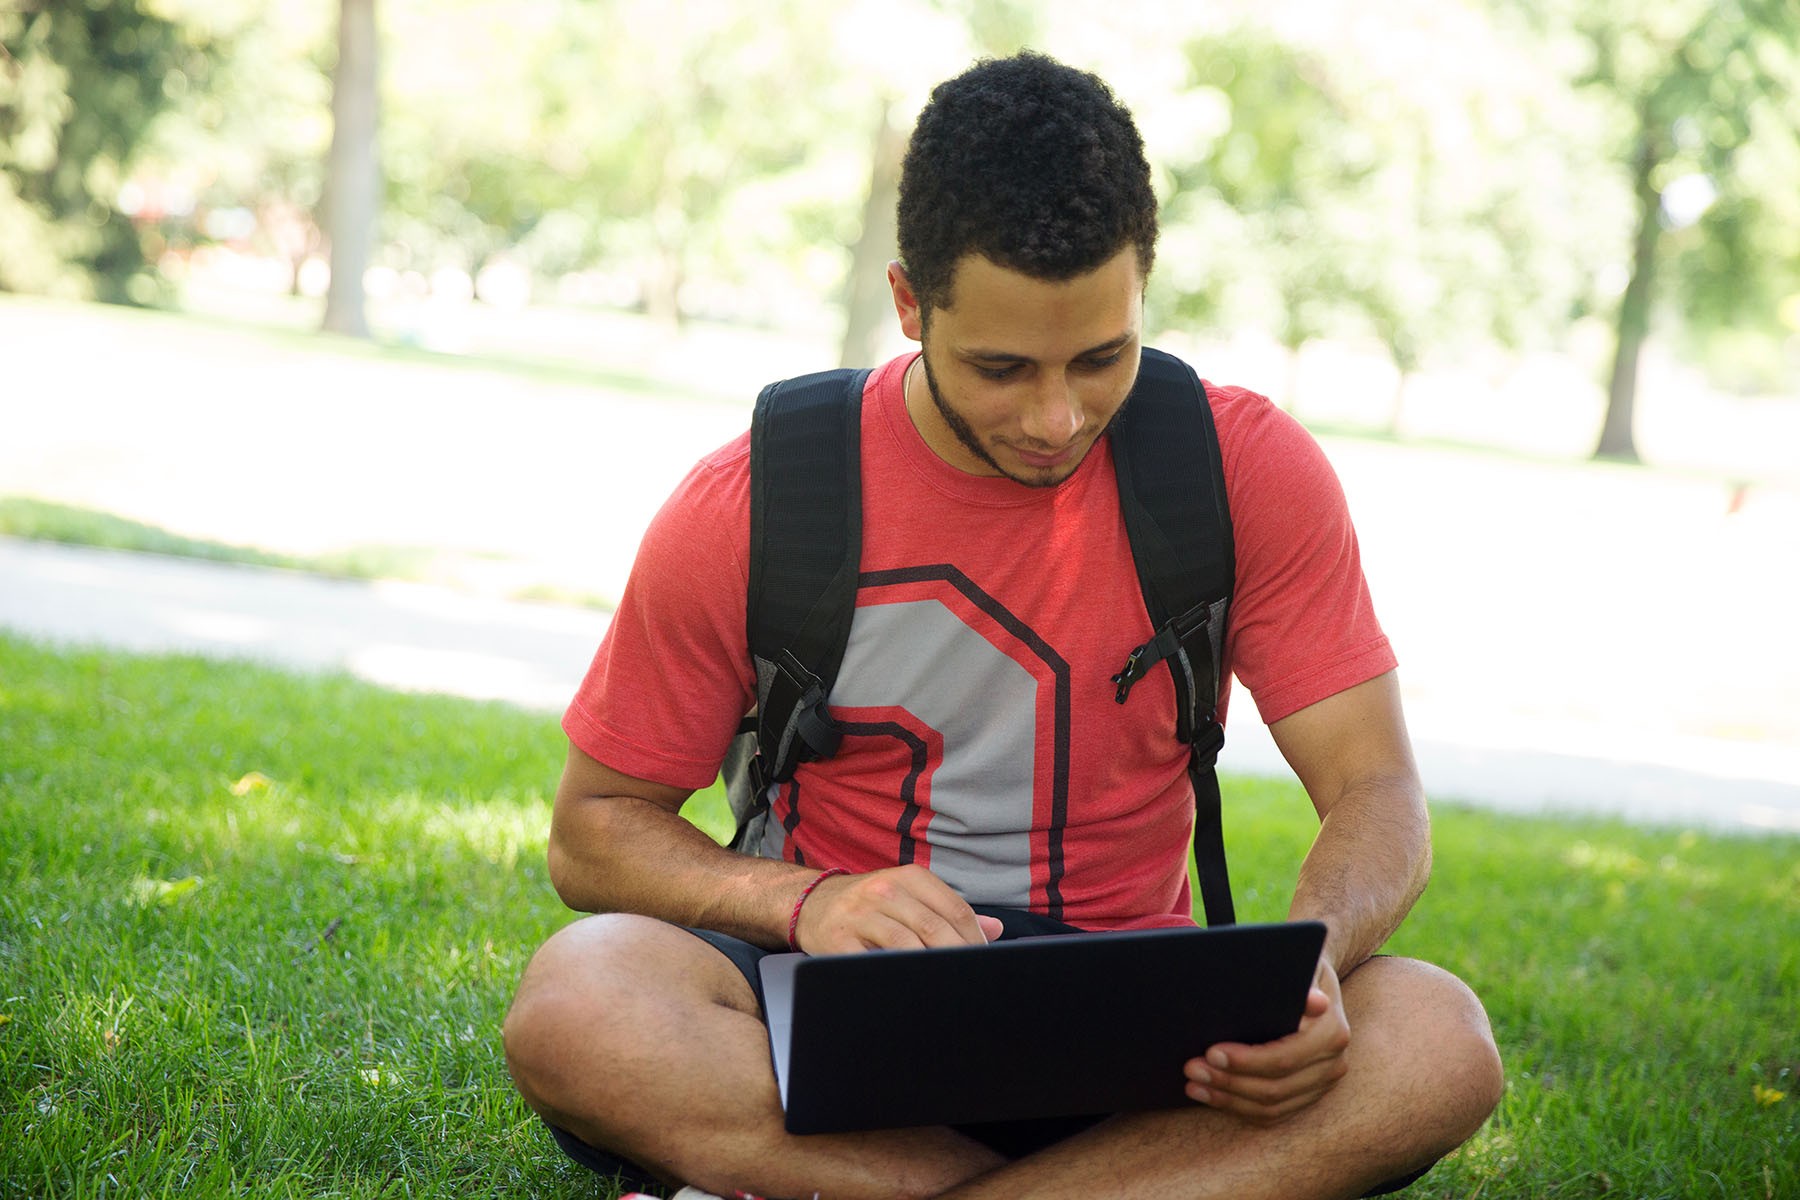 Young man wearing a red Ohio State T-shirt sits on the grass outside while looking at a laptop